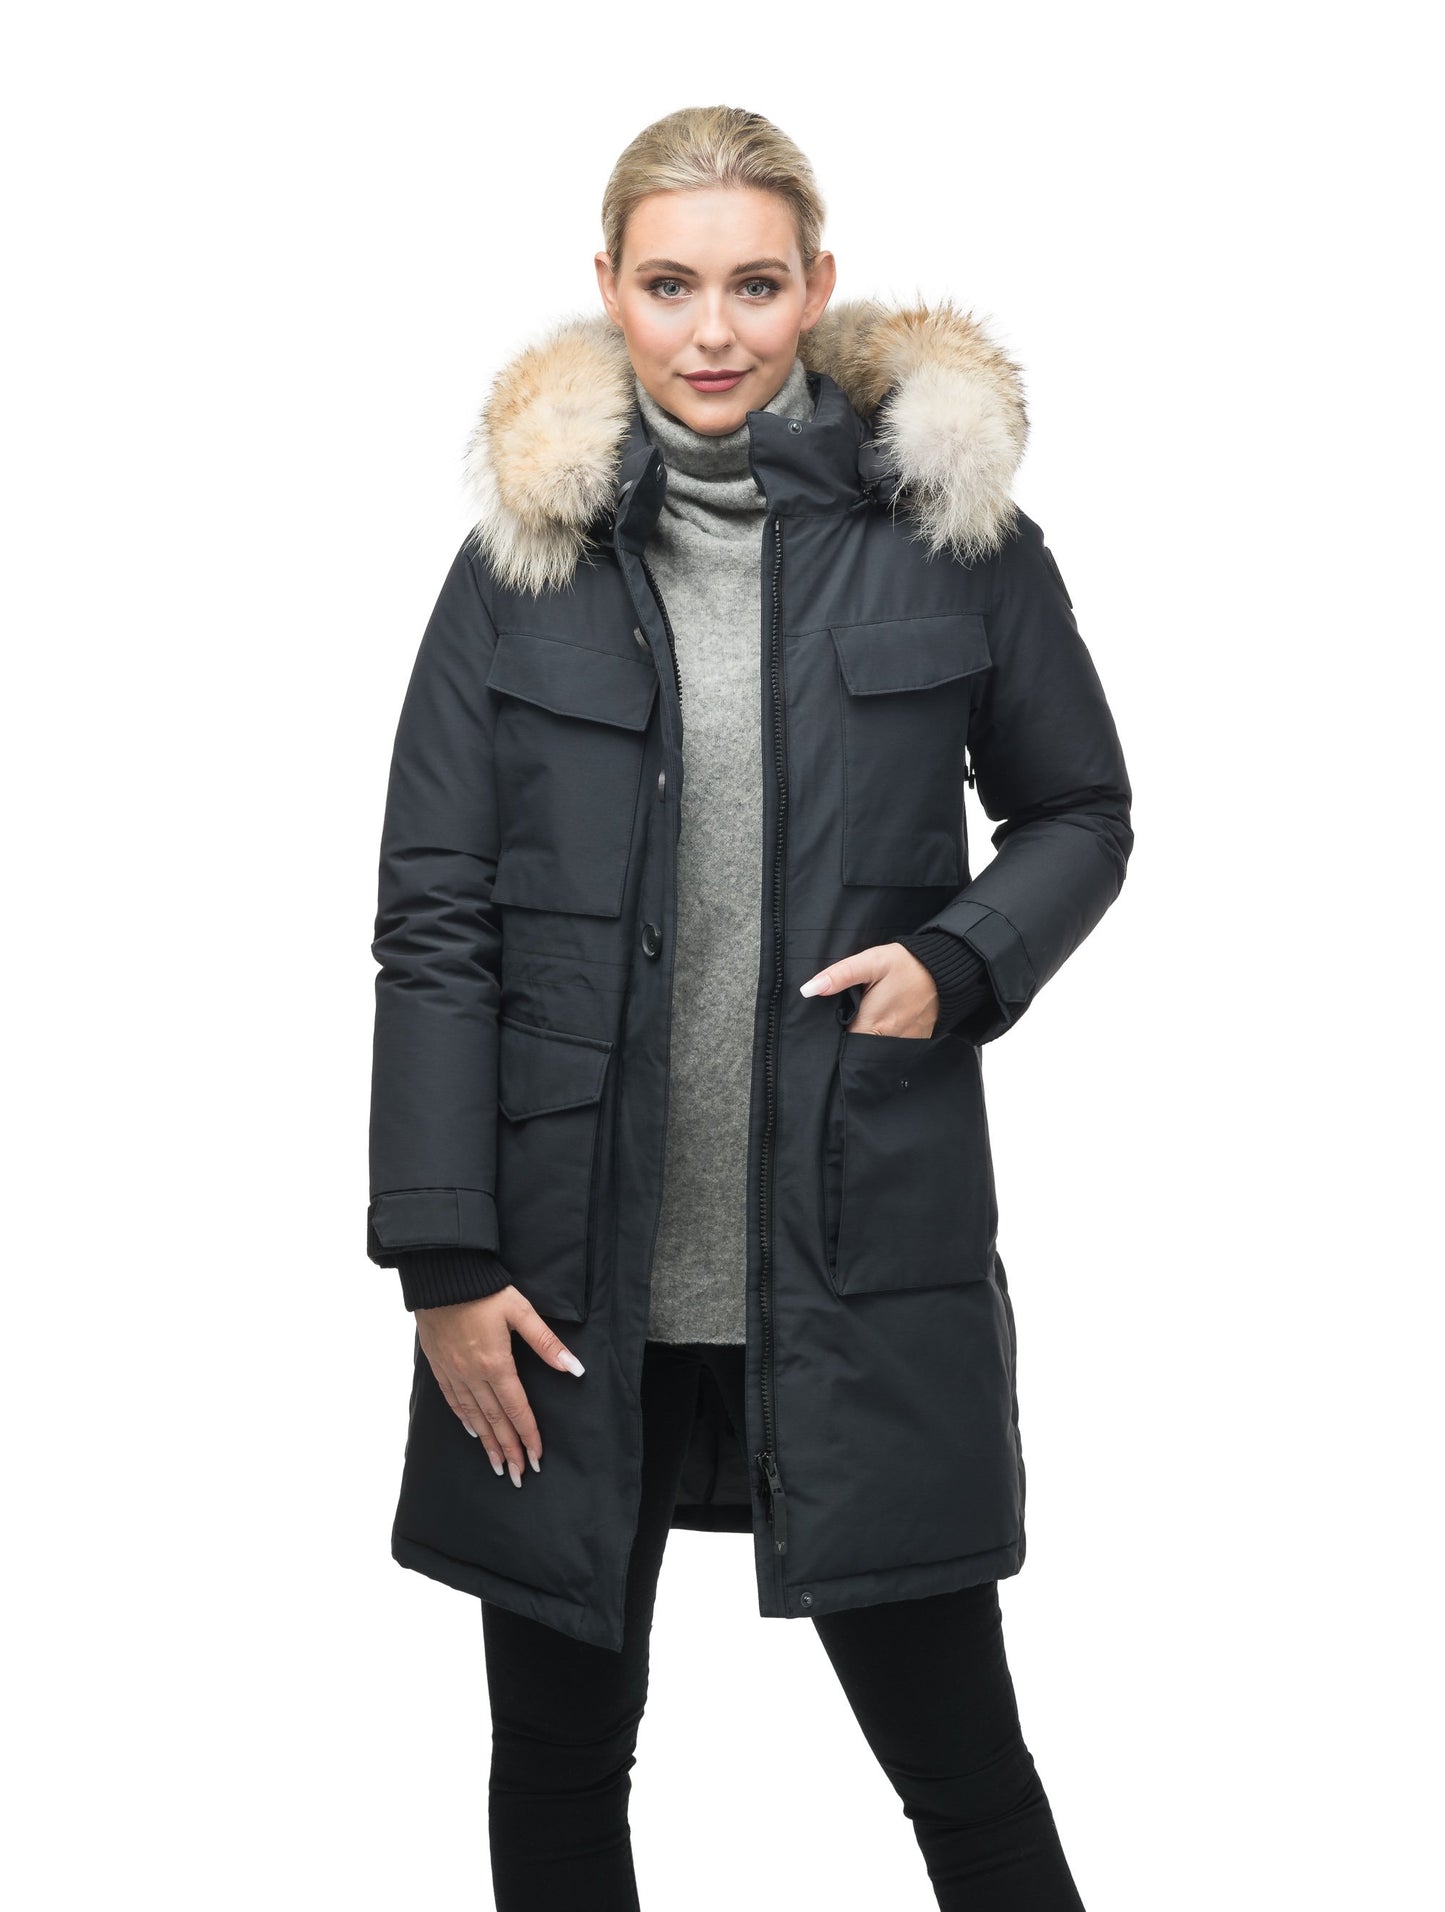 Women's knee length down filled parka with two chest patch pockets and two waist patch pockets in Black